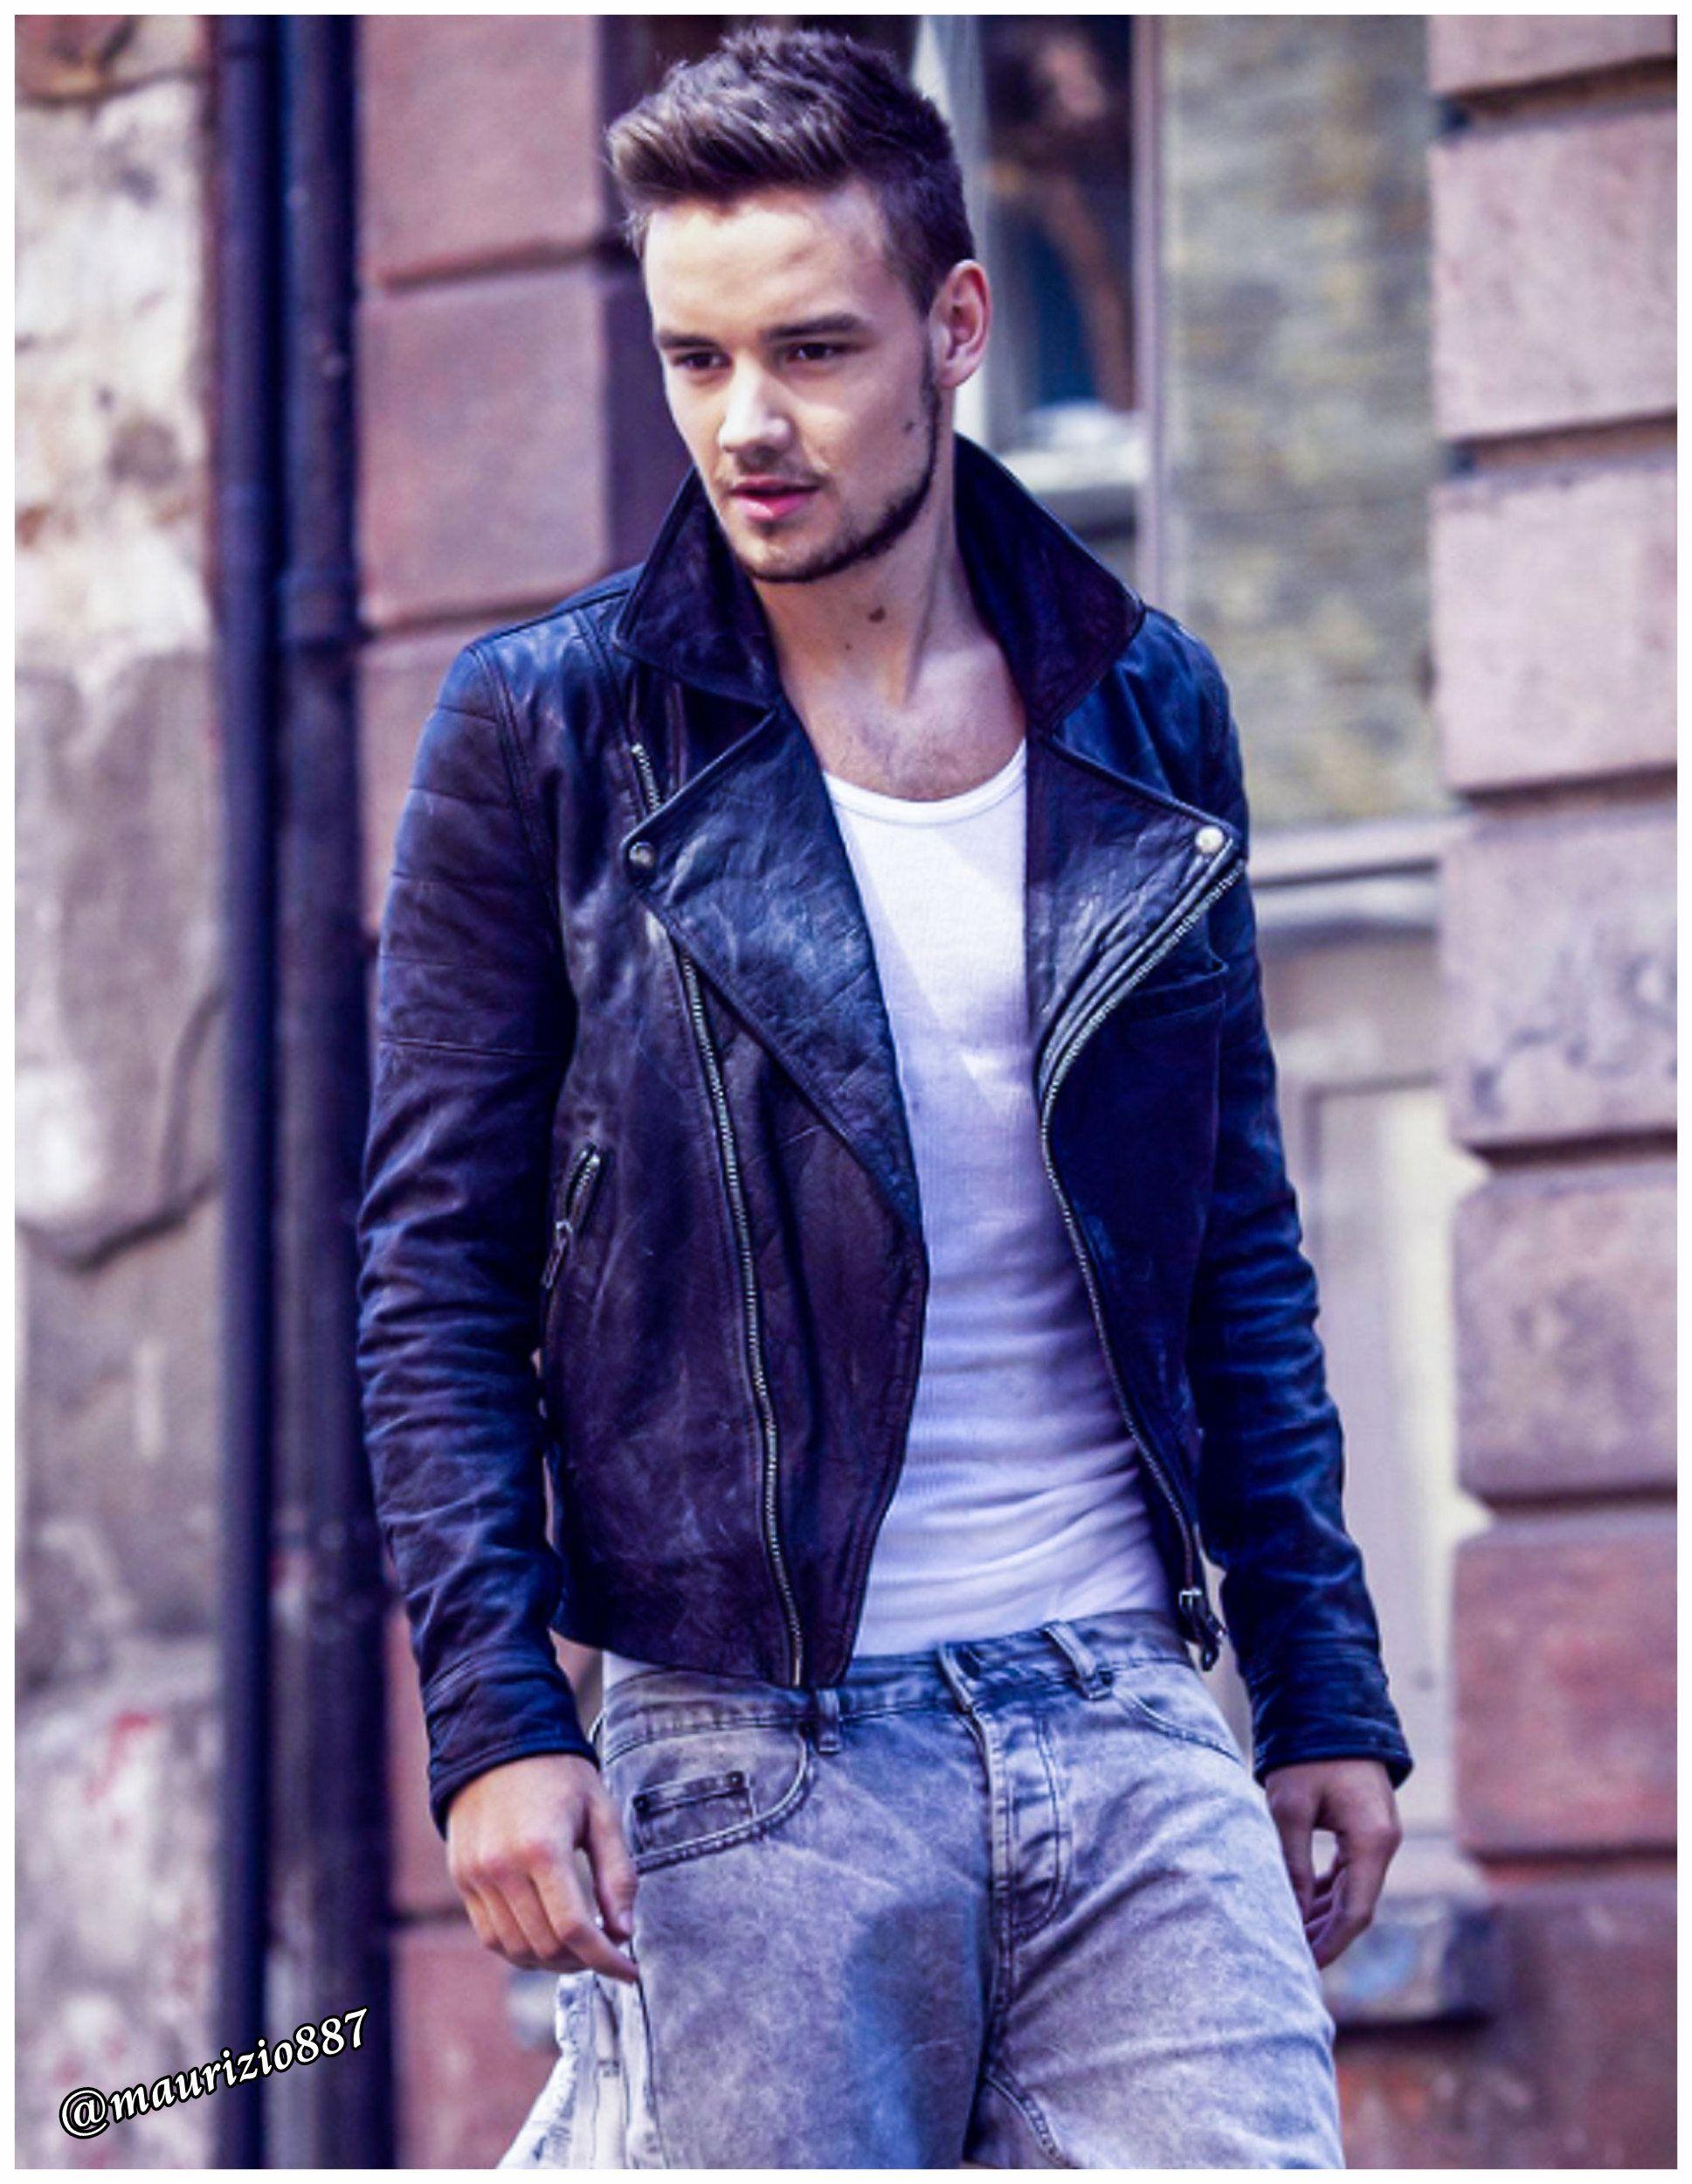 Liam Payne ONE Direction Photo Free HD Wallpaper, Image